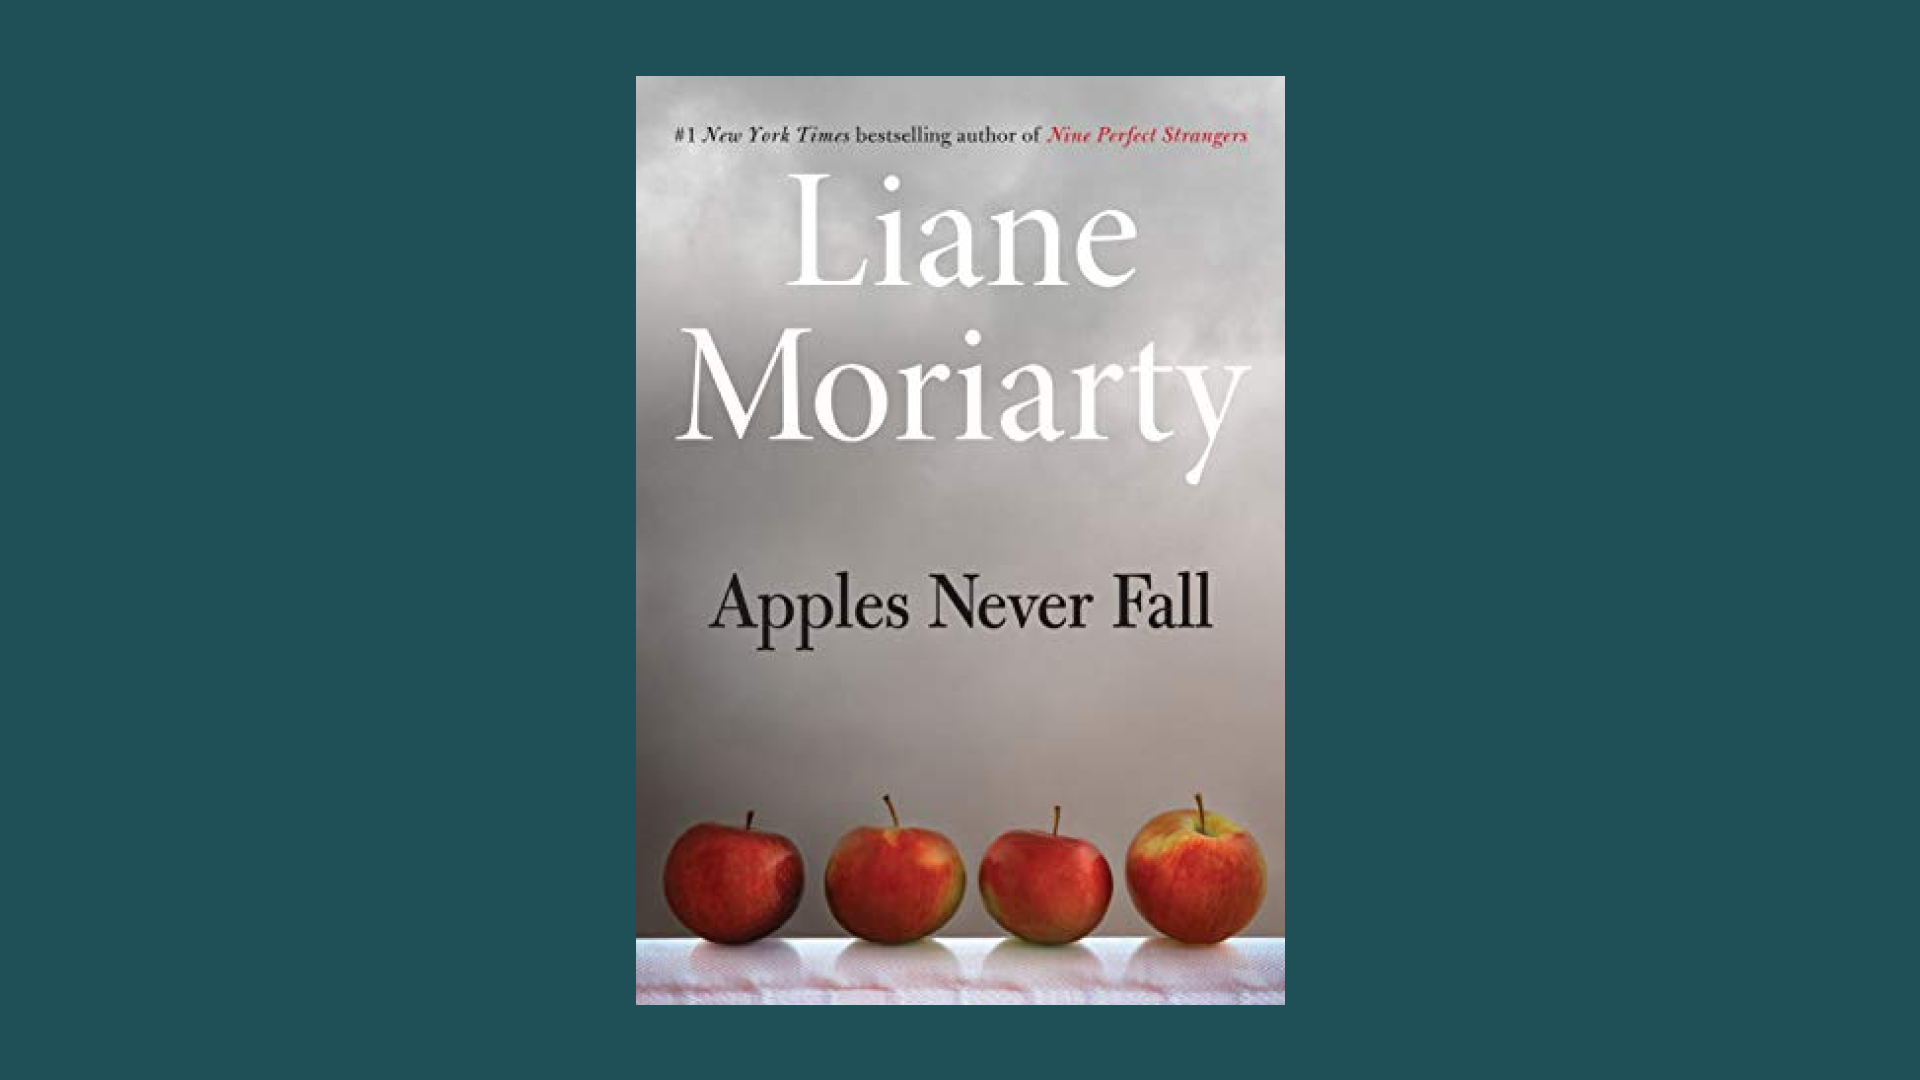 “Apples Never Fall” by Liane Moriarty 